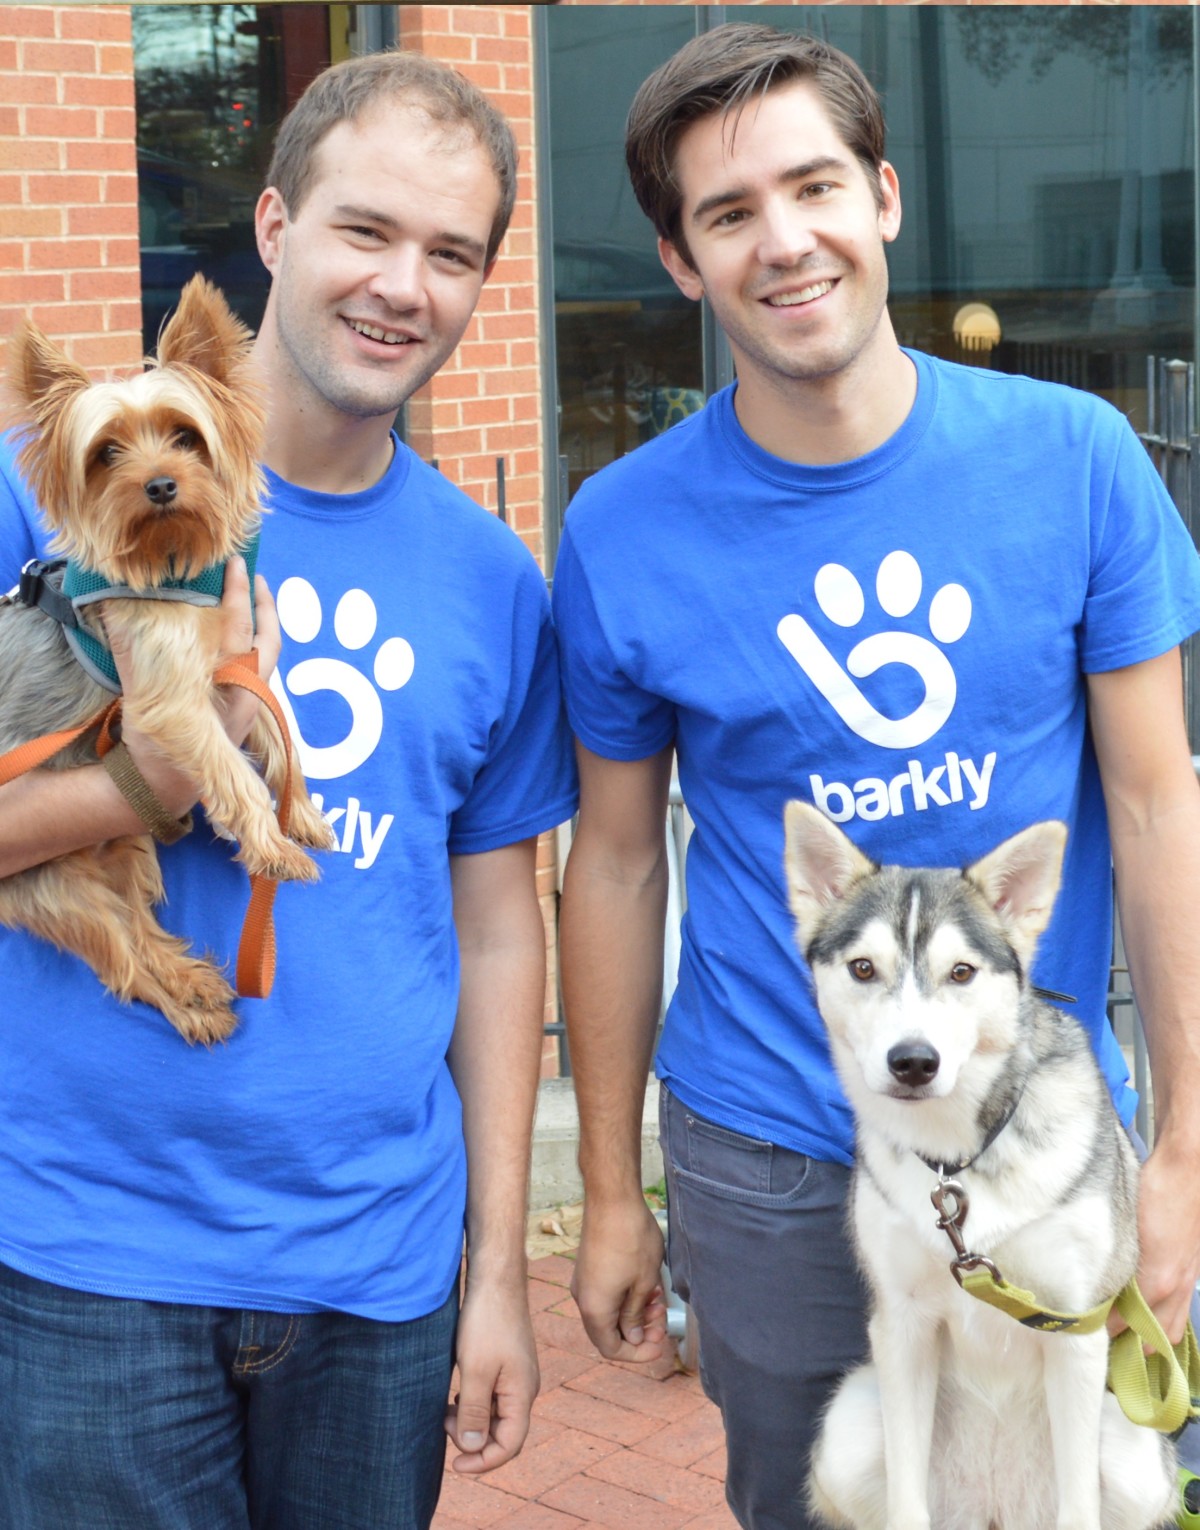 Barkly cofounders Chris Gonzalez (left) and Dave Comiskey (and their dogs).